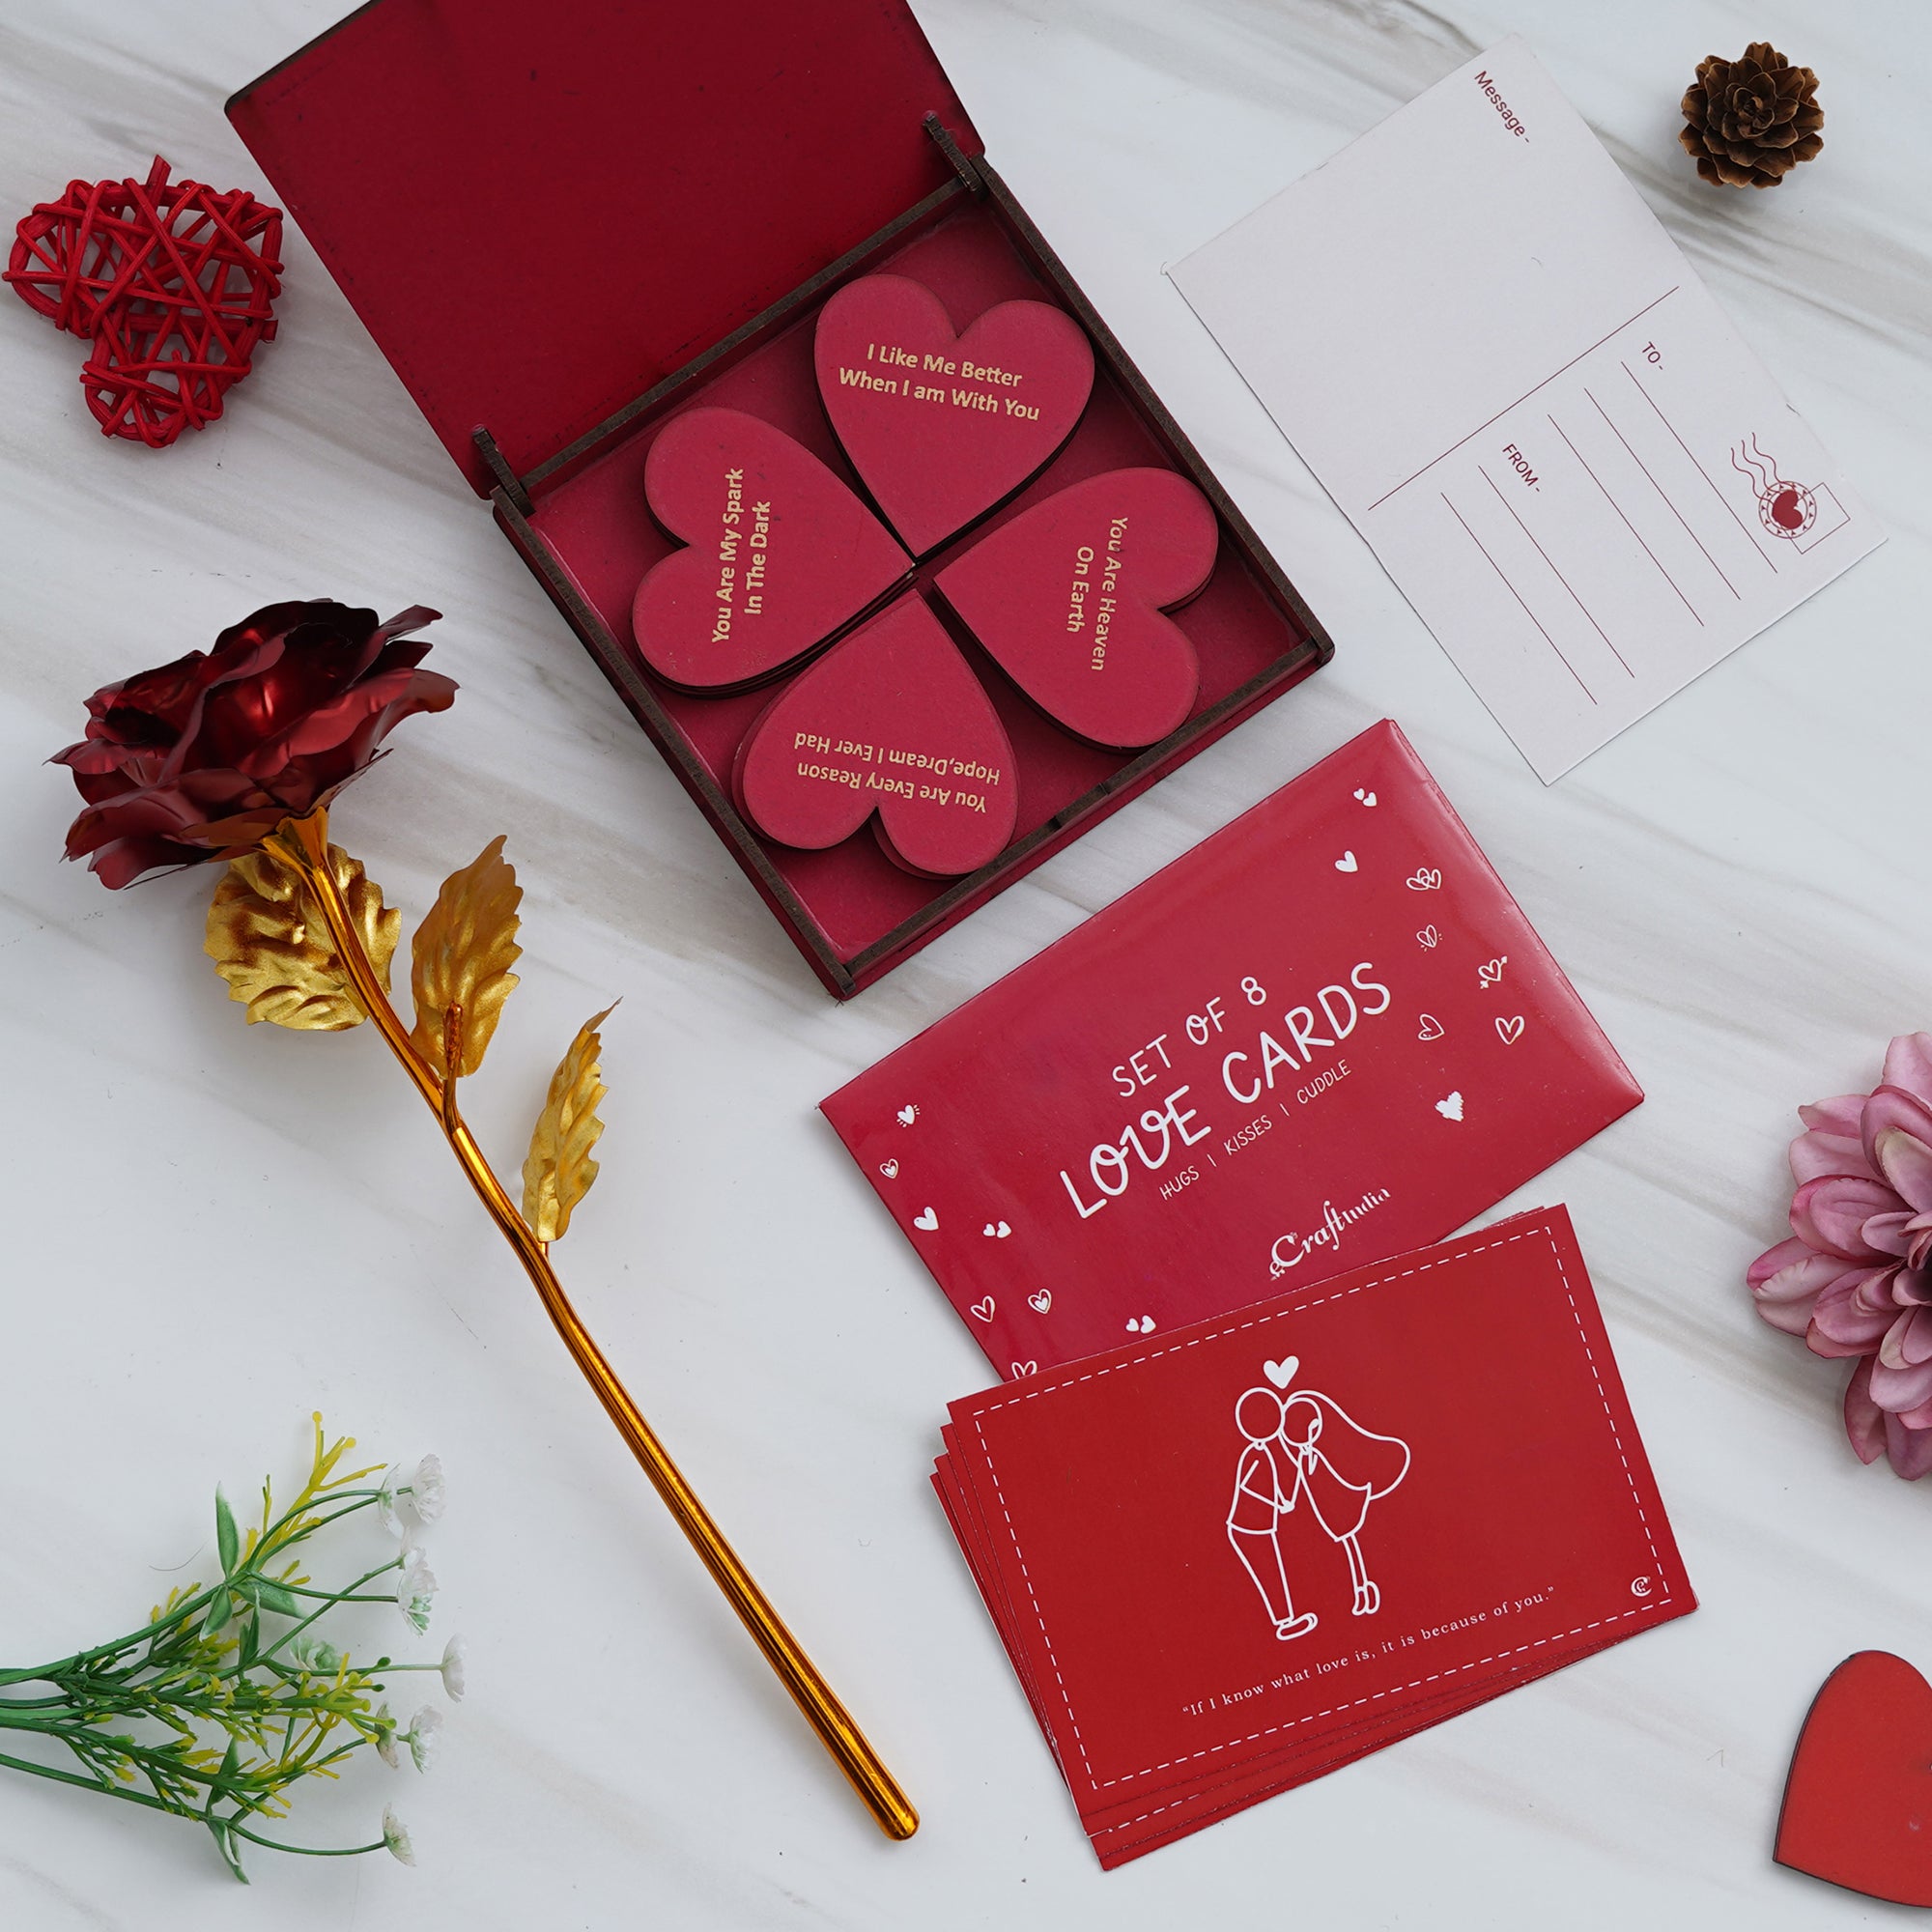 Valentine Combo of Pack of 8 Love Gift Cards, Golden Red Rose Gift Set, "20 Reasons Why I Love You" Printed on Little Red Hearts Decorative Wooden Gift Set Box